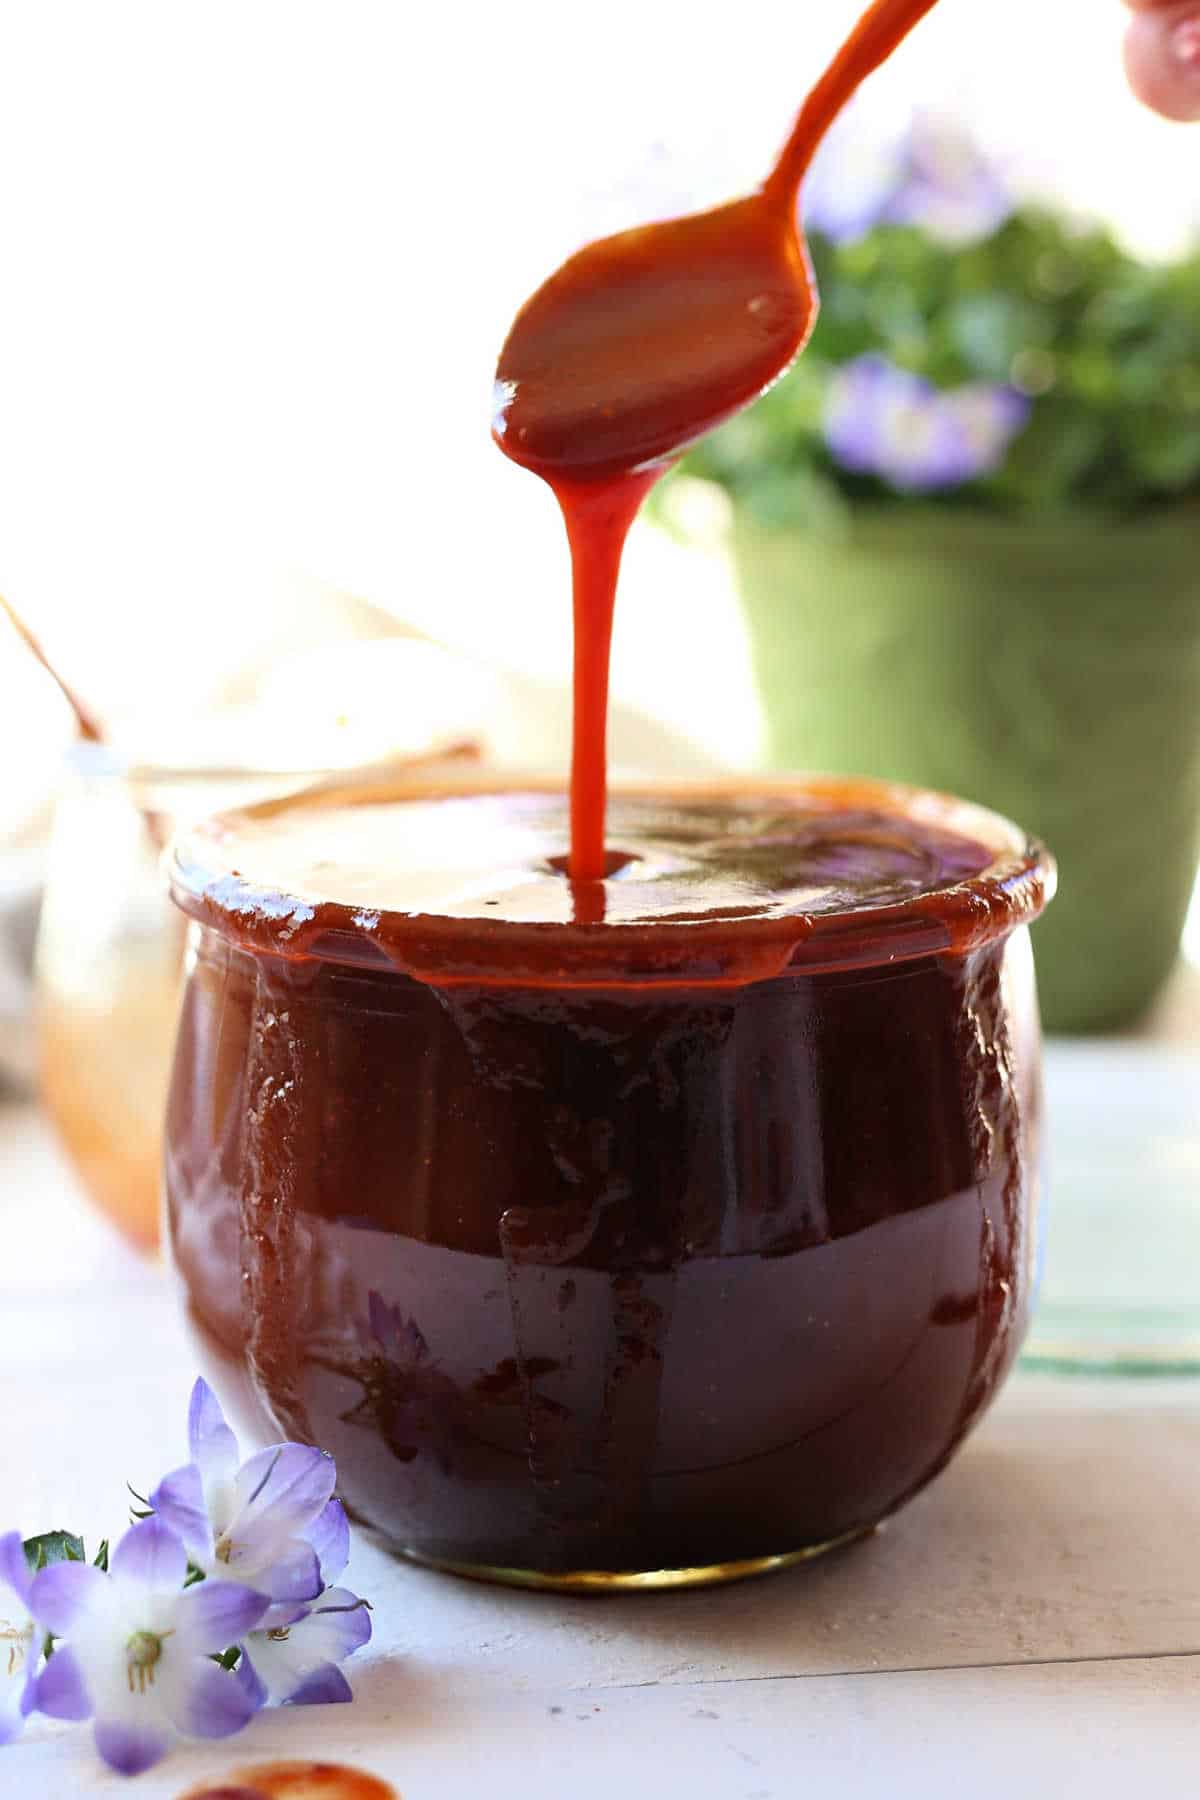 BBQ sauce recipe for use in gluten-free cooking and recipes.